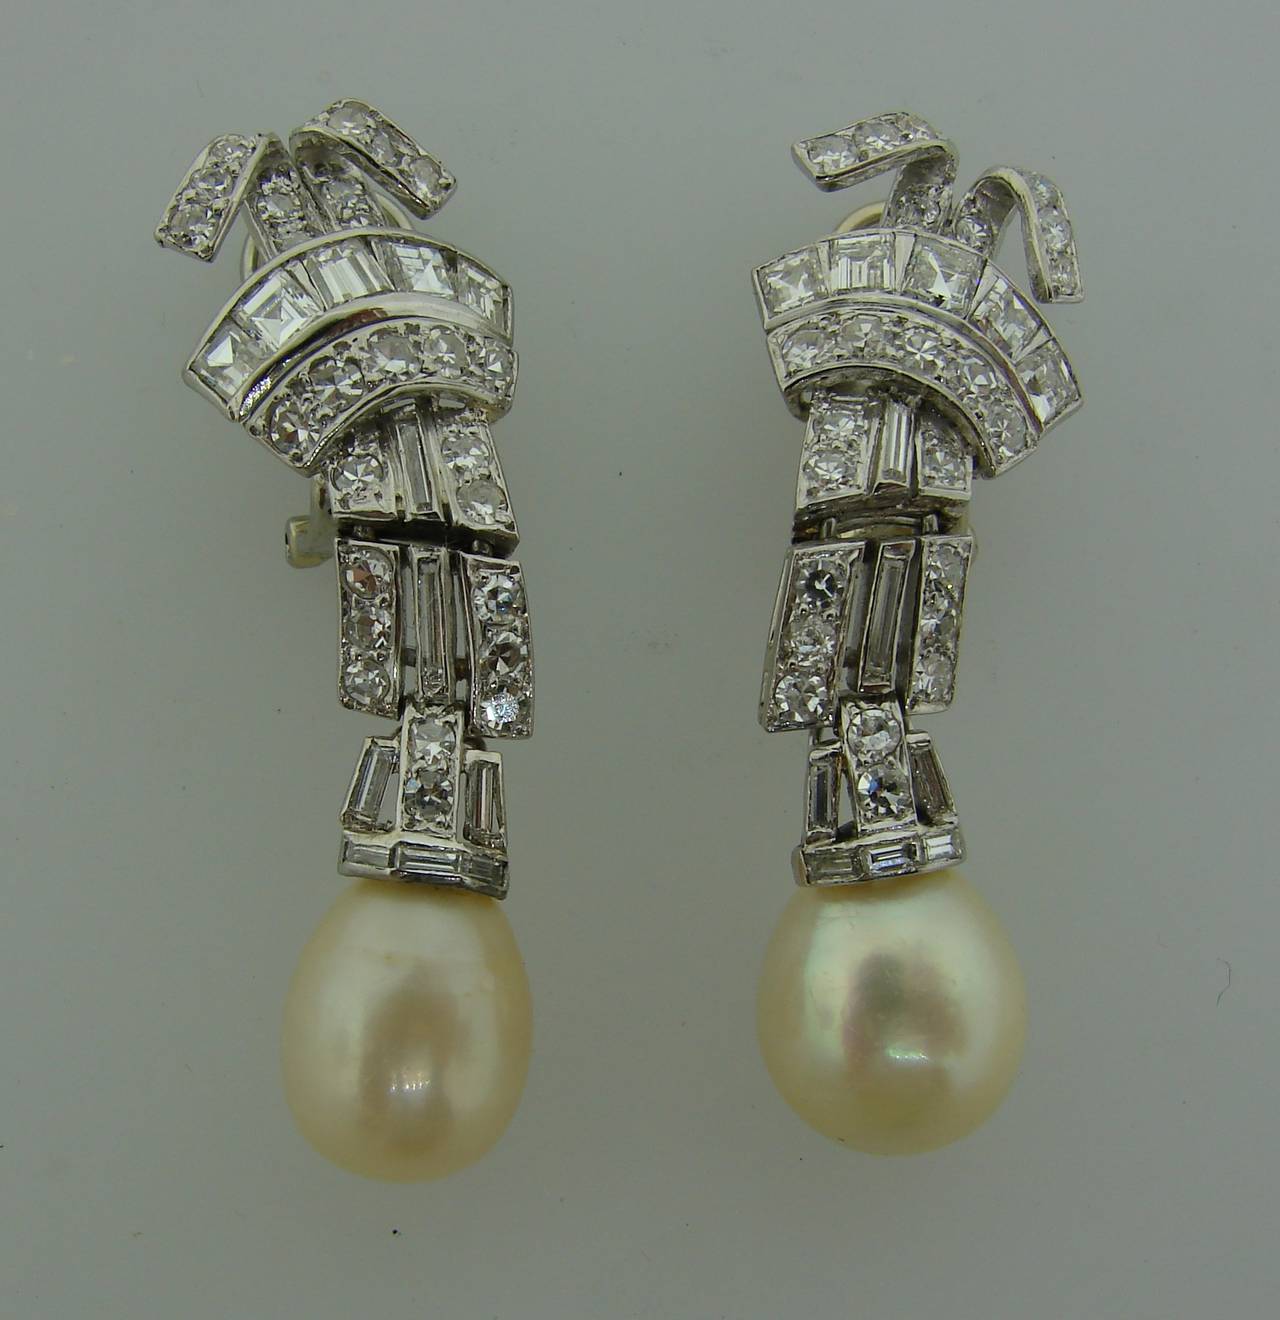 Elegant and classy earrings featuring two natural saltwater pearls set in platinum encrusted with diamonds.

The pearls are accompanied with a Gem Testing Report from French Gemological Laboratory stating that the pearls natural saltwater, total